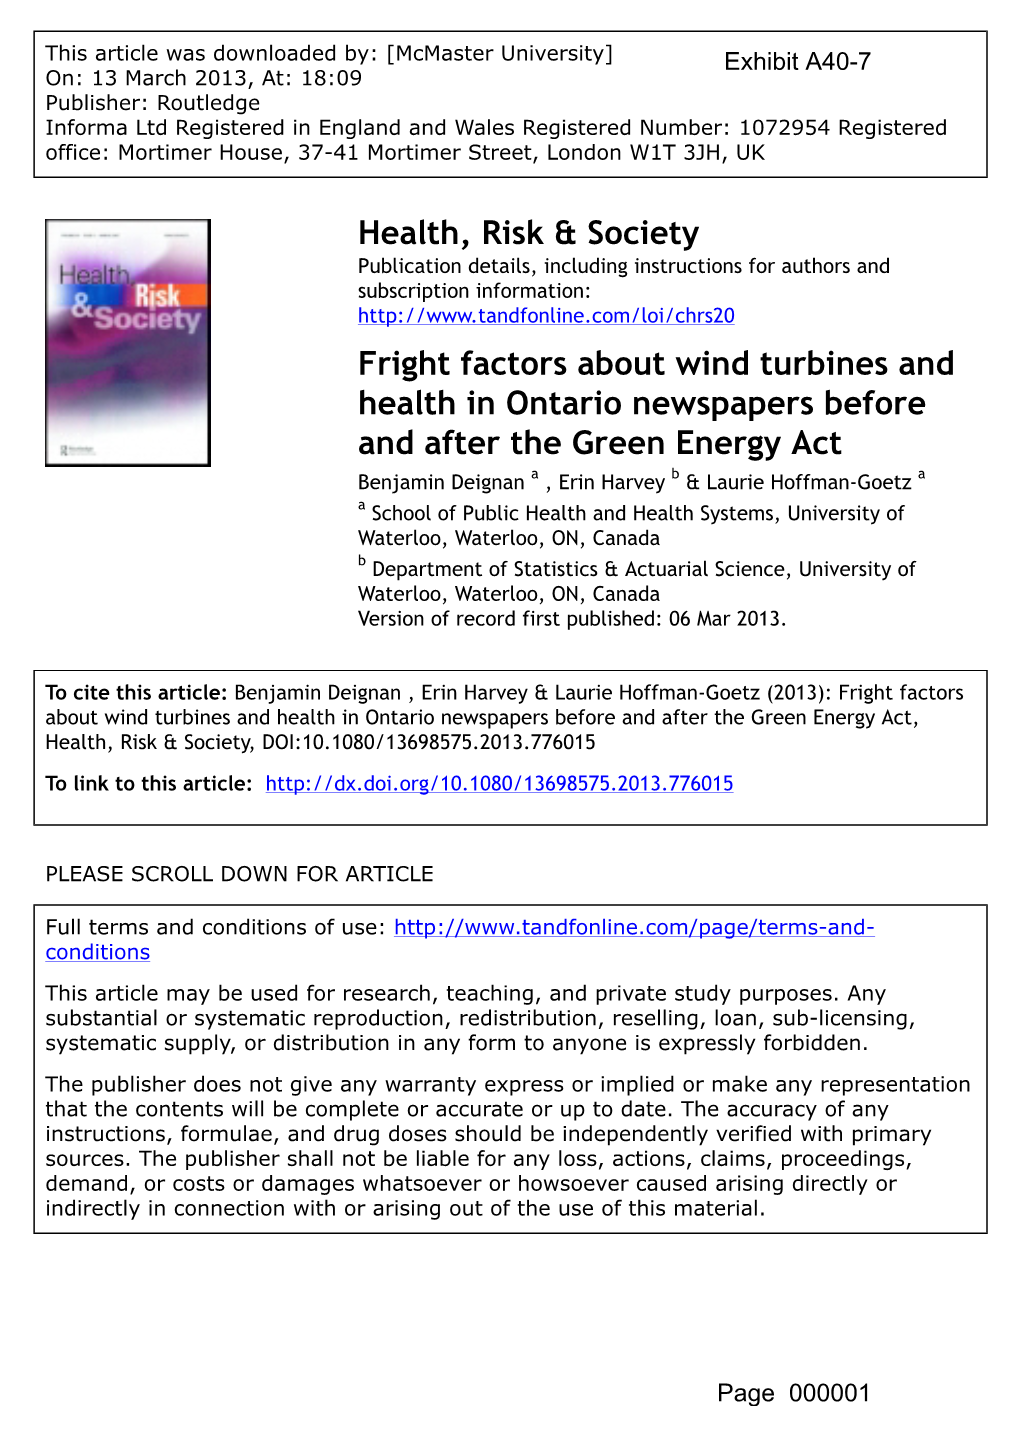 Fright Factors About Wind Turbines and Health in Ontario Newspapers Before